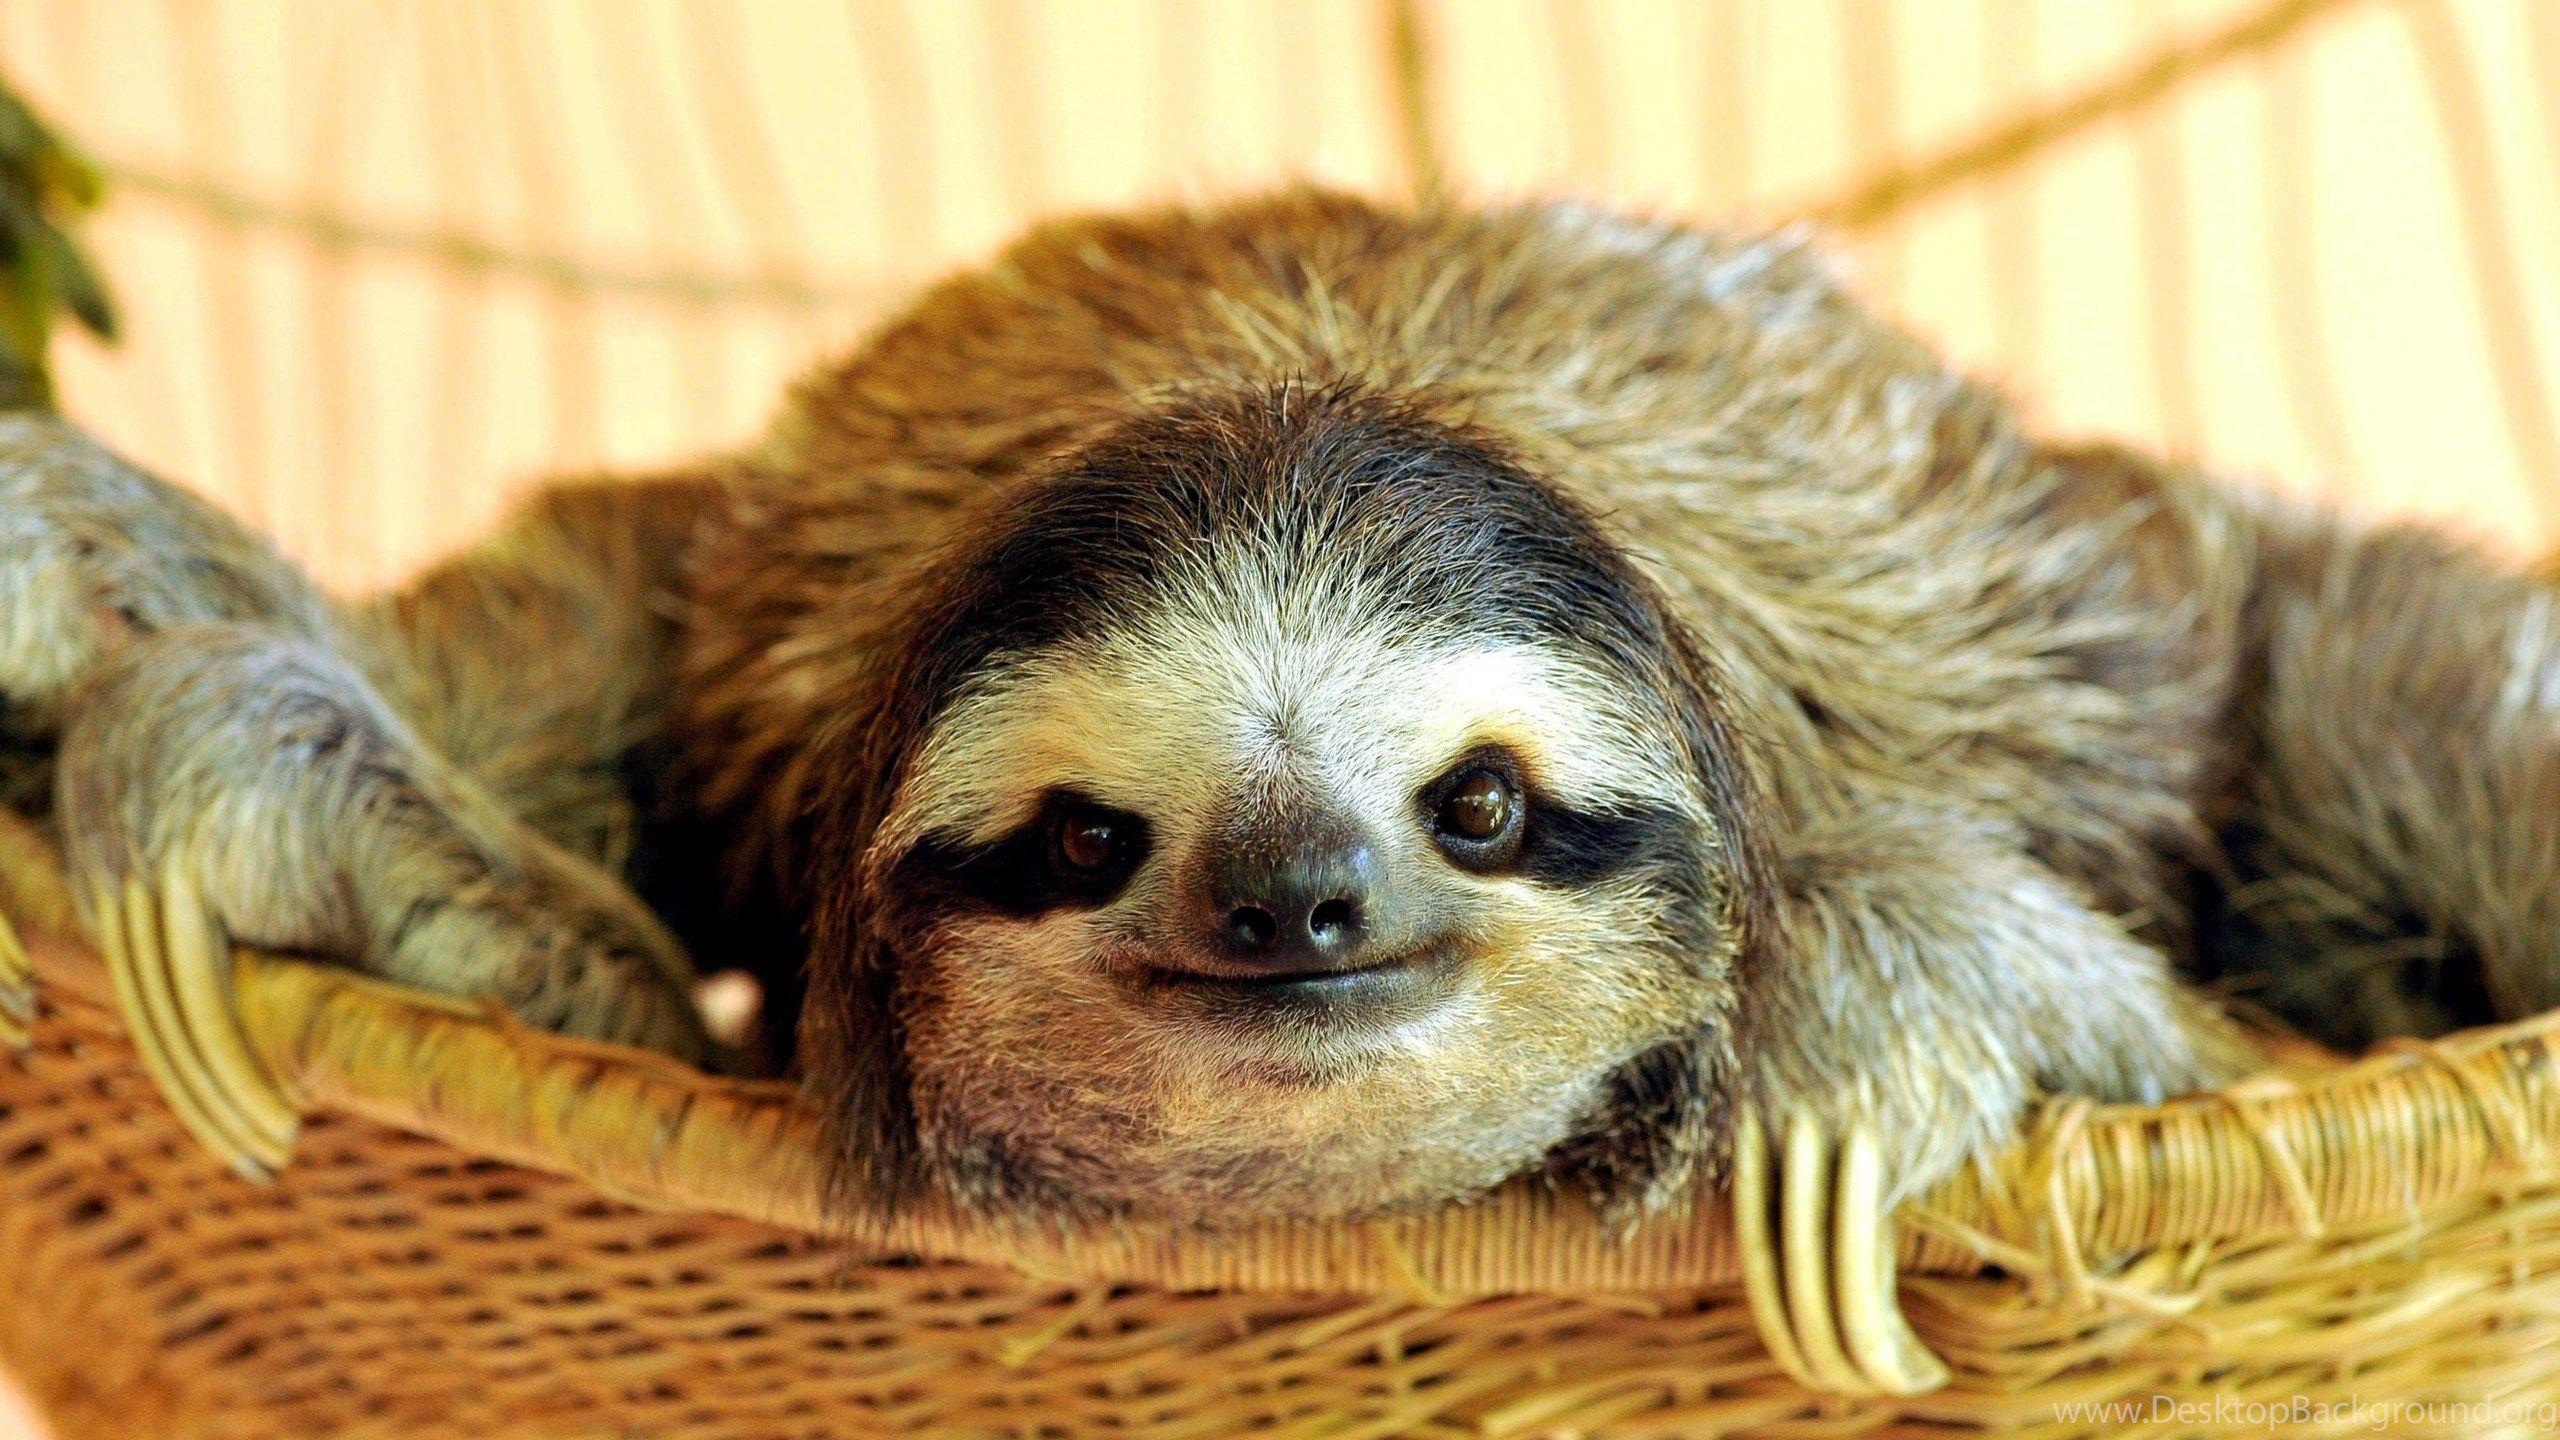 Similar Image Search For Post: Buttercup The Sloth Wallpaper